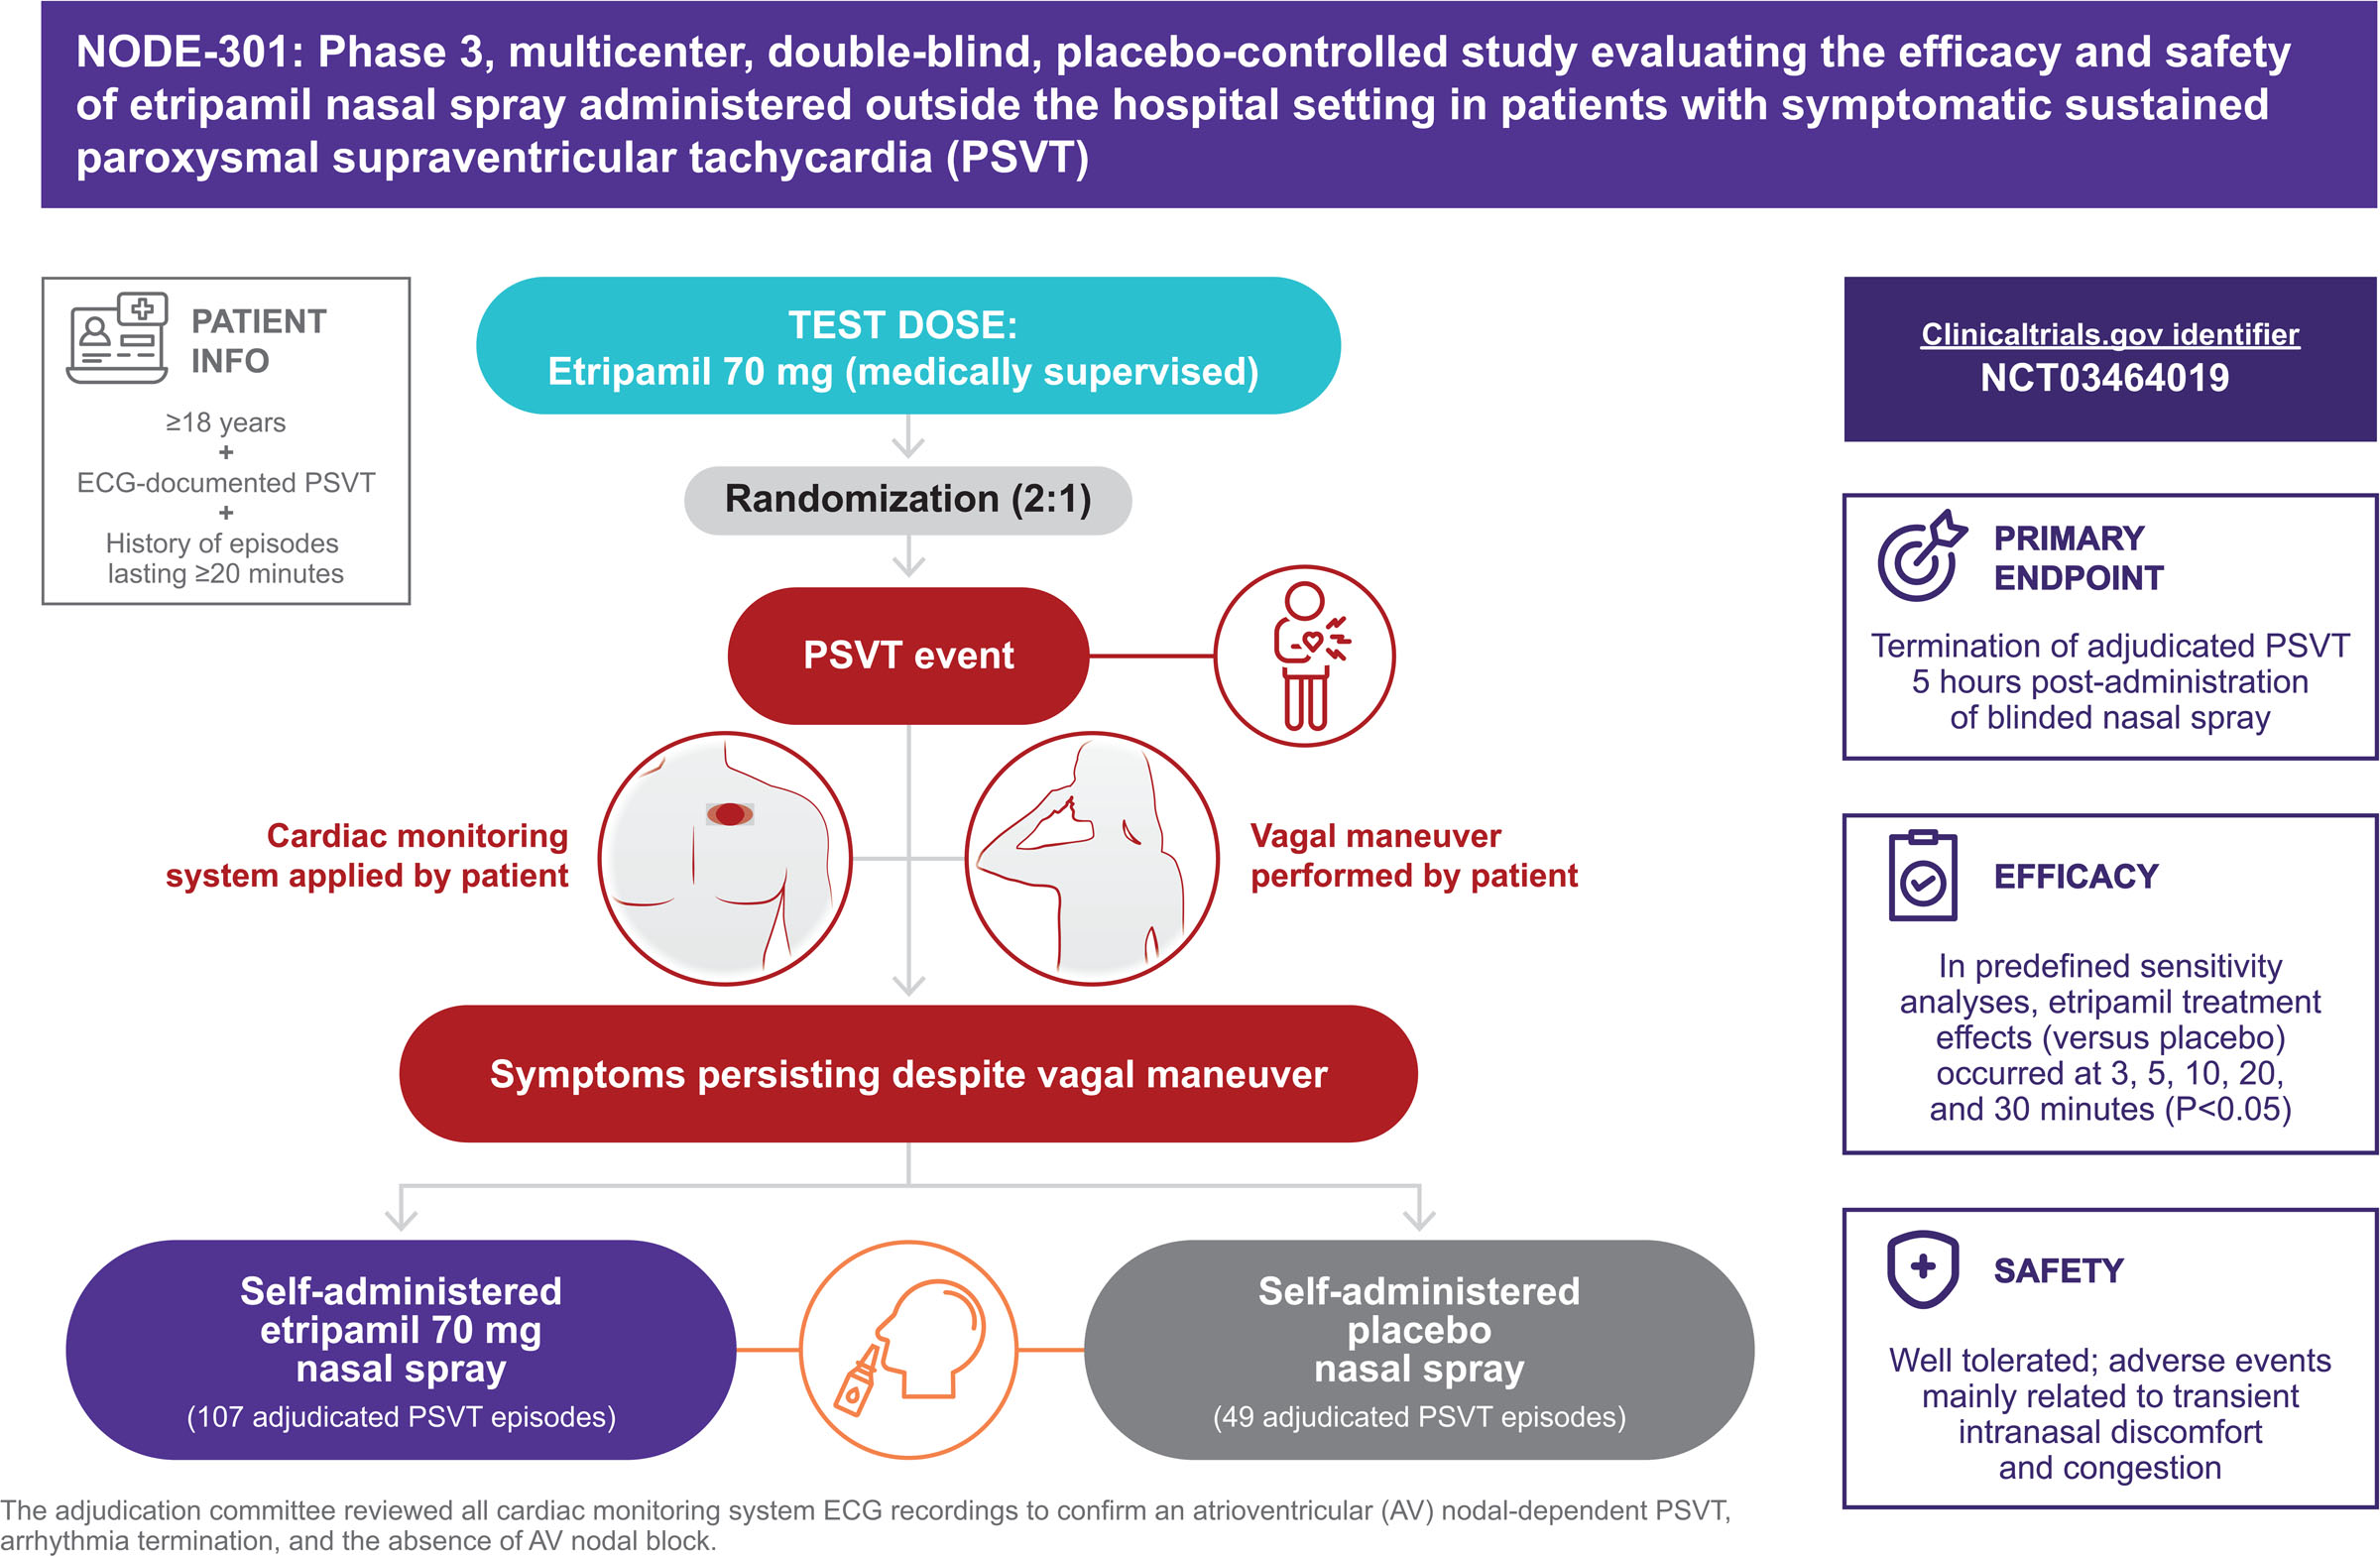 First Randomized, Multicenter, Placebo-Controlled Study of Self-Administered Intranasal Etripamil for Acute Conversion of Spontaneous Paroxysmal Supraventricular Tachycardia (NODE-301)